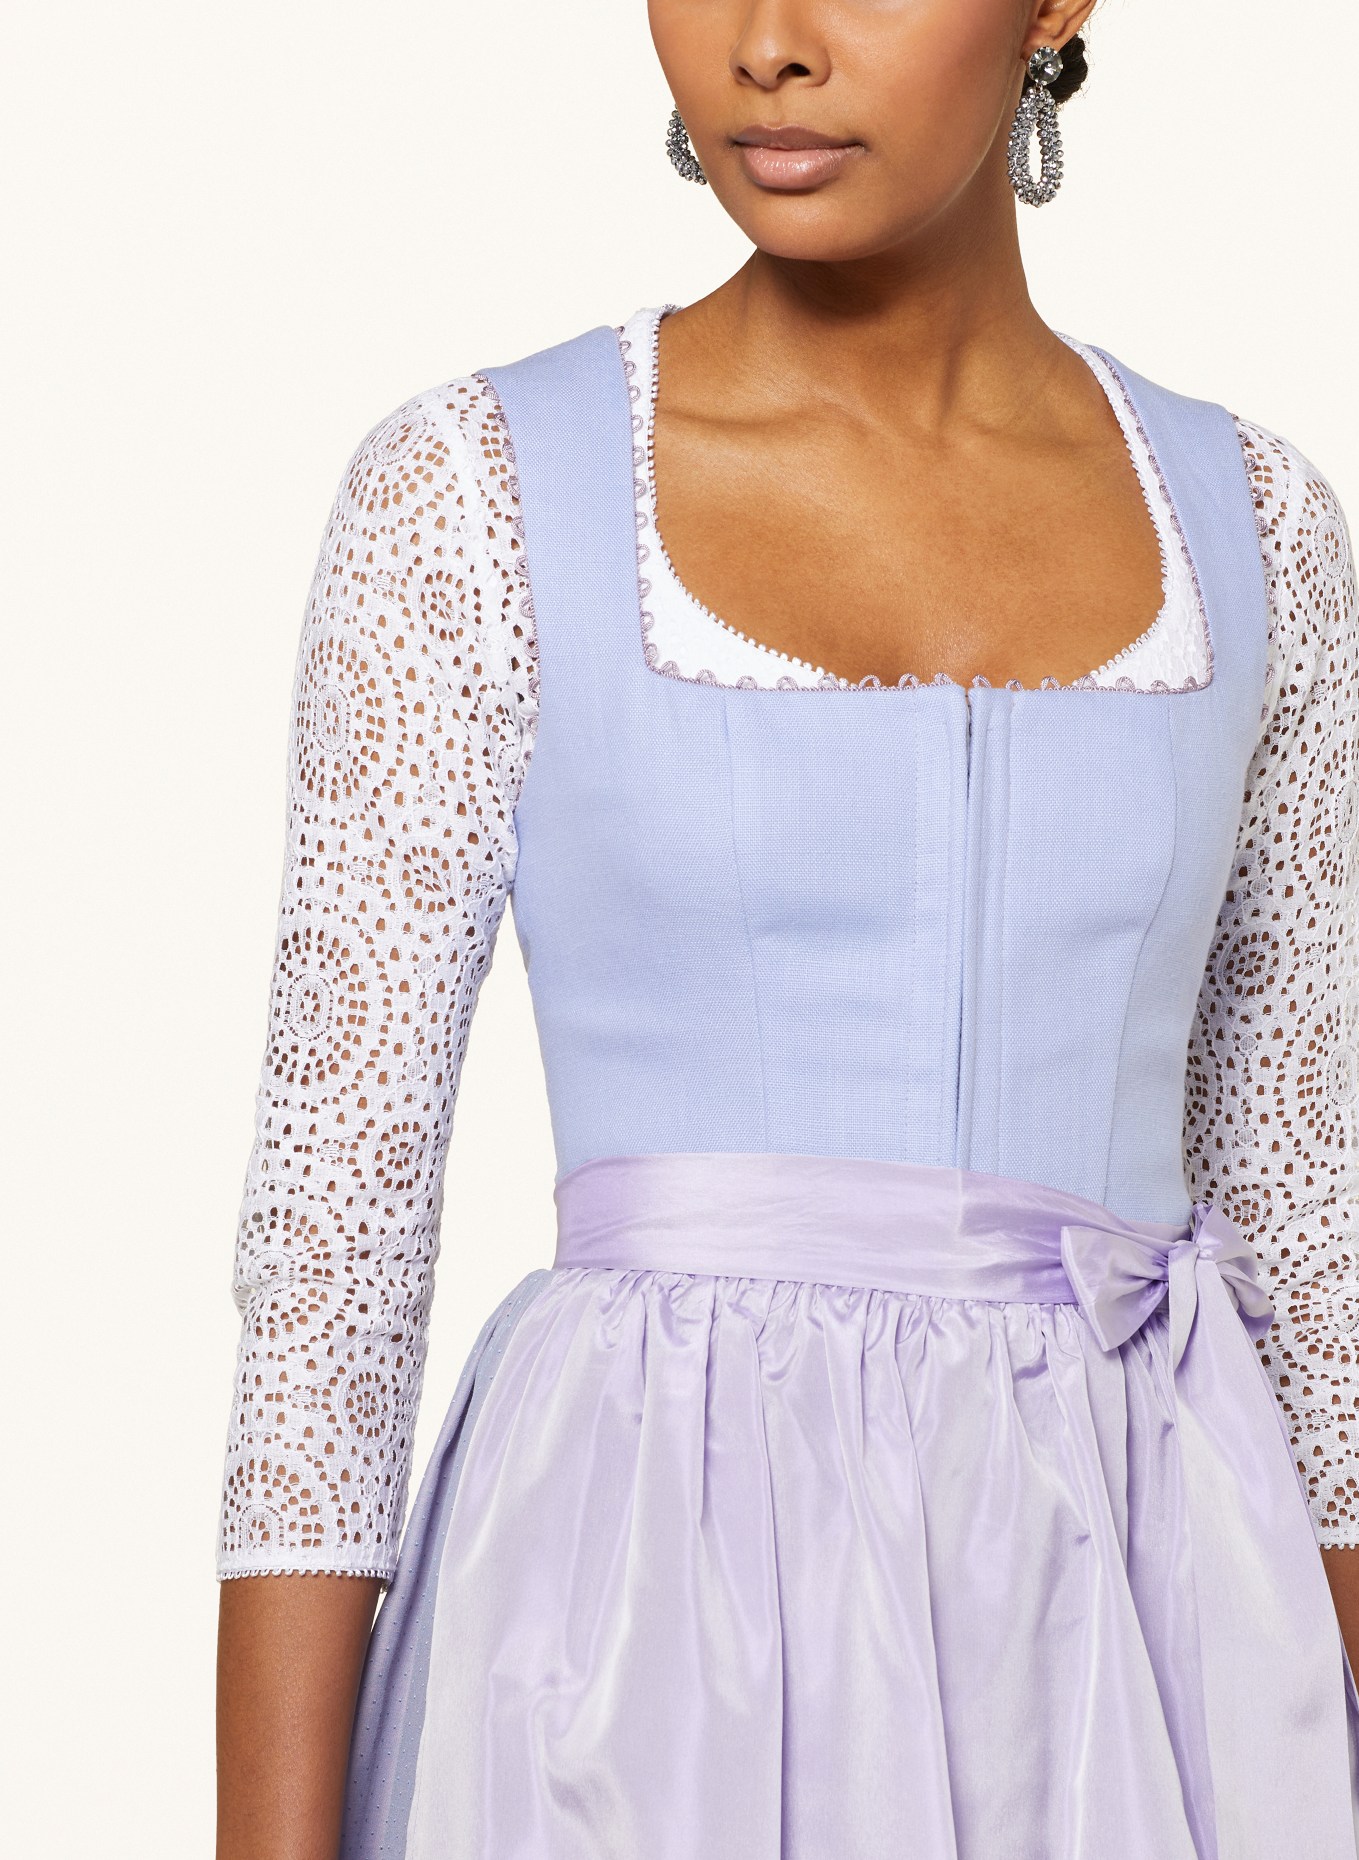 KINGA MATHE Dirndl blouse SAMANTHA in lace with 3/4 sleeves, Color: WHITE (Image 3)